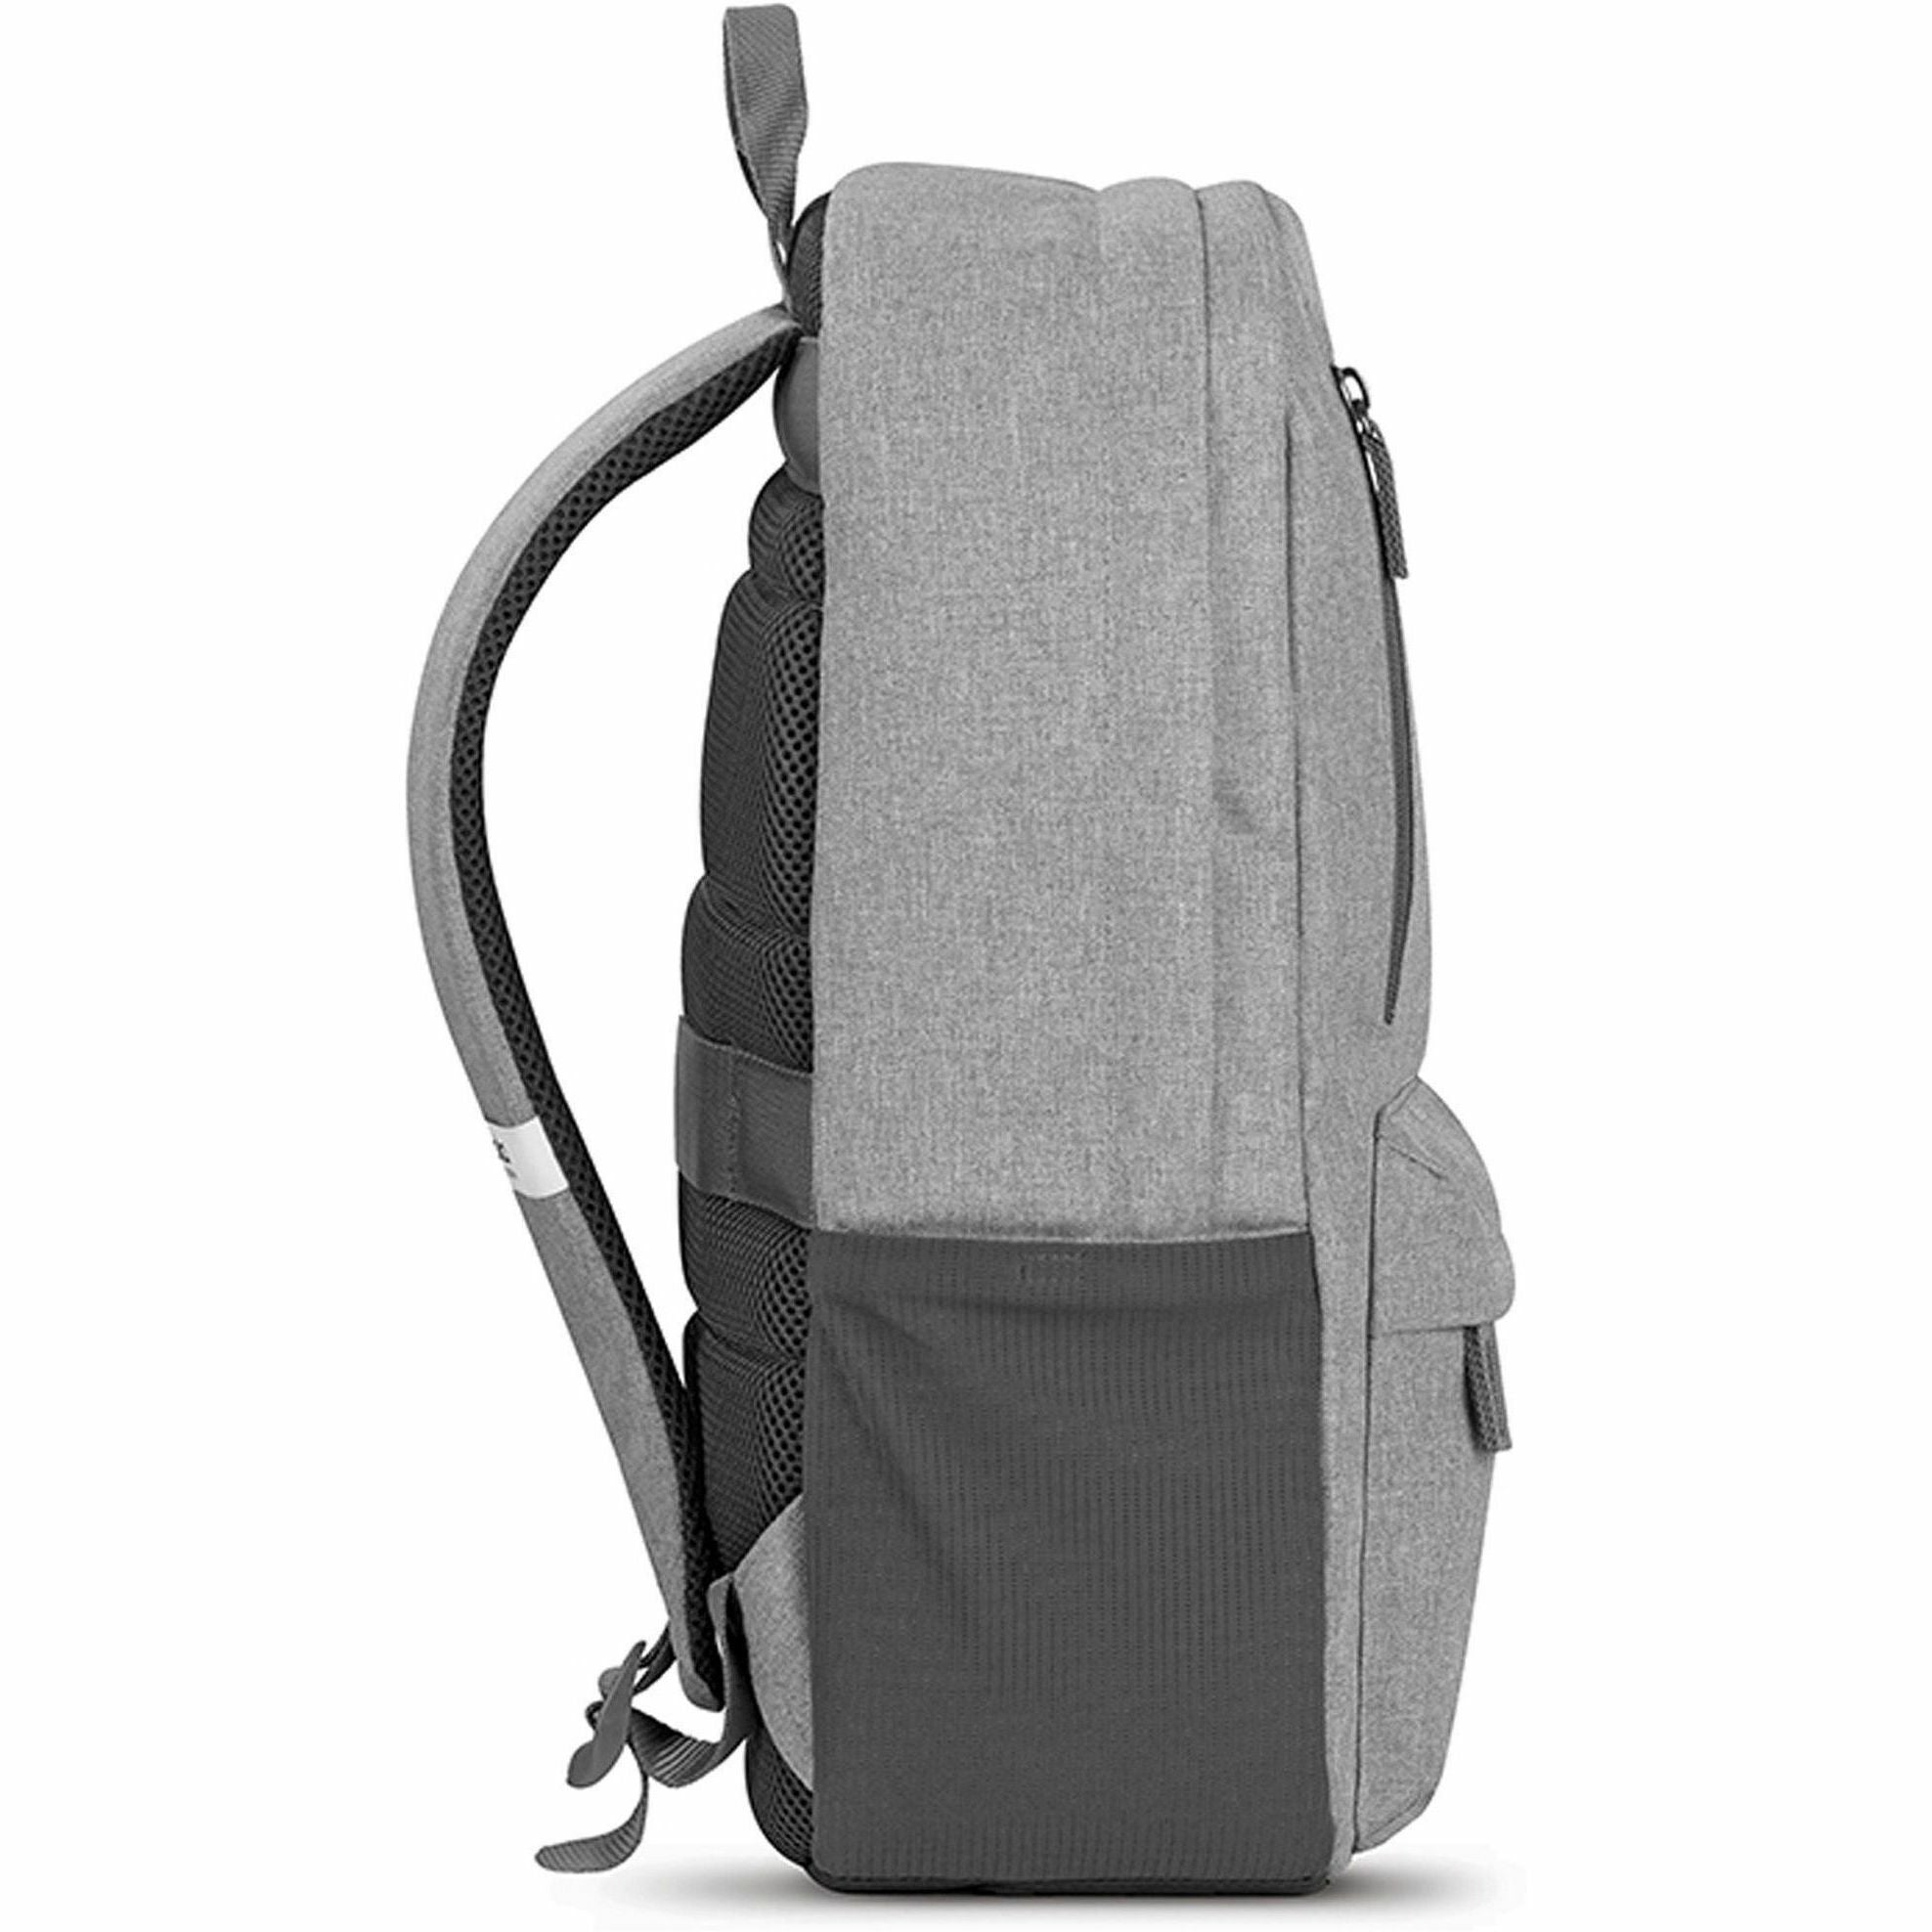 solo-recover-carrying-case-backpack-for-156-notebook-gray-bump-resistant-damage-resistant-shoulder-strap-luggage-strap-handle-148-height-x-113-width-x-7-depth-1-each_uslubn76110 - 4